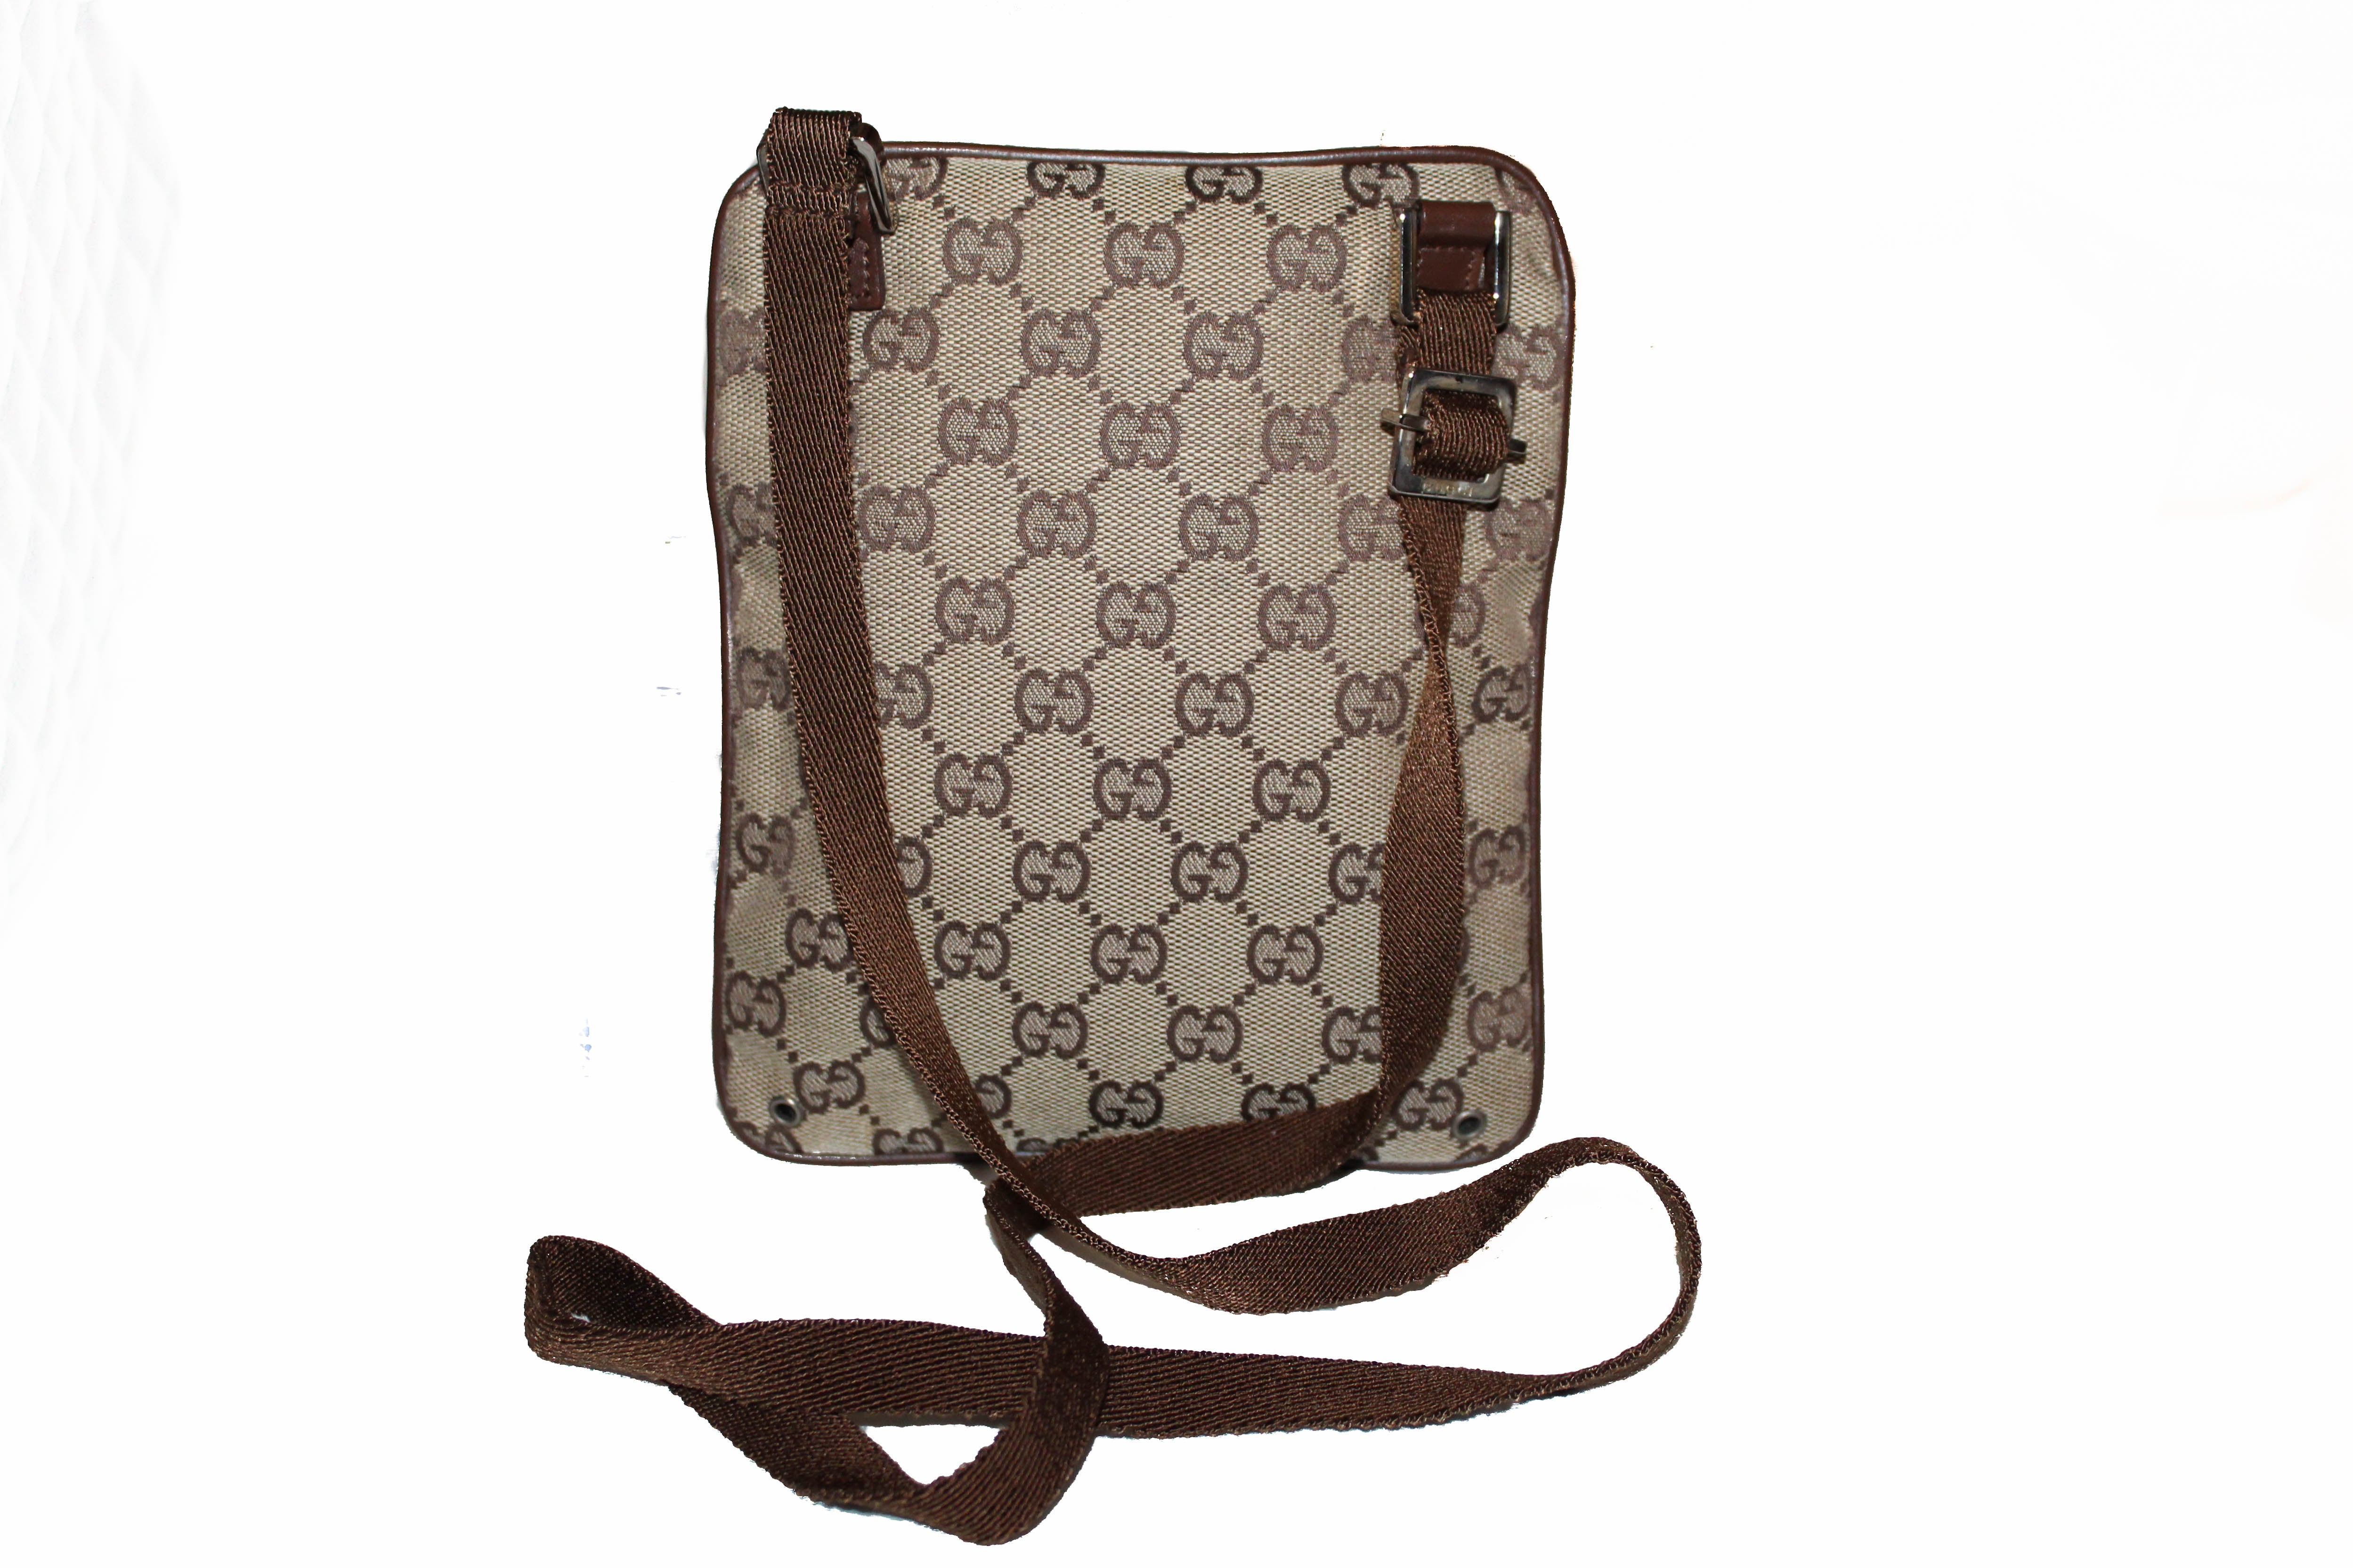 Authentic Gucci Brown Signature GG Fabric Small Messenger Bag